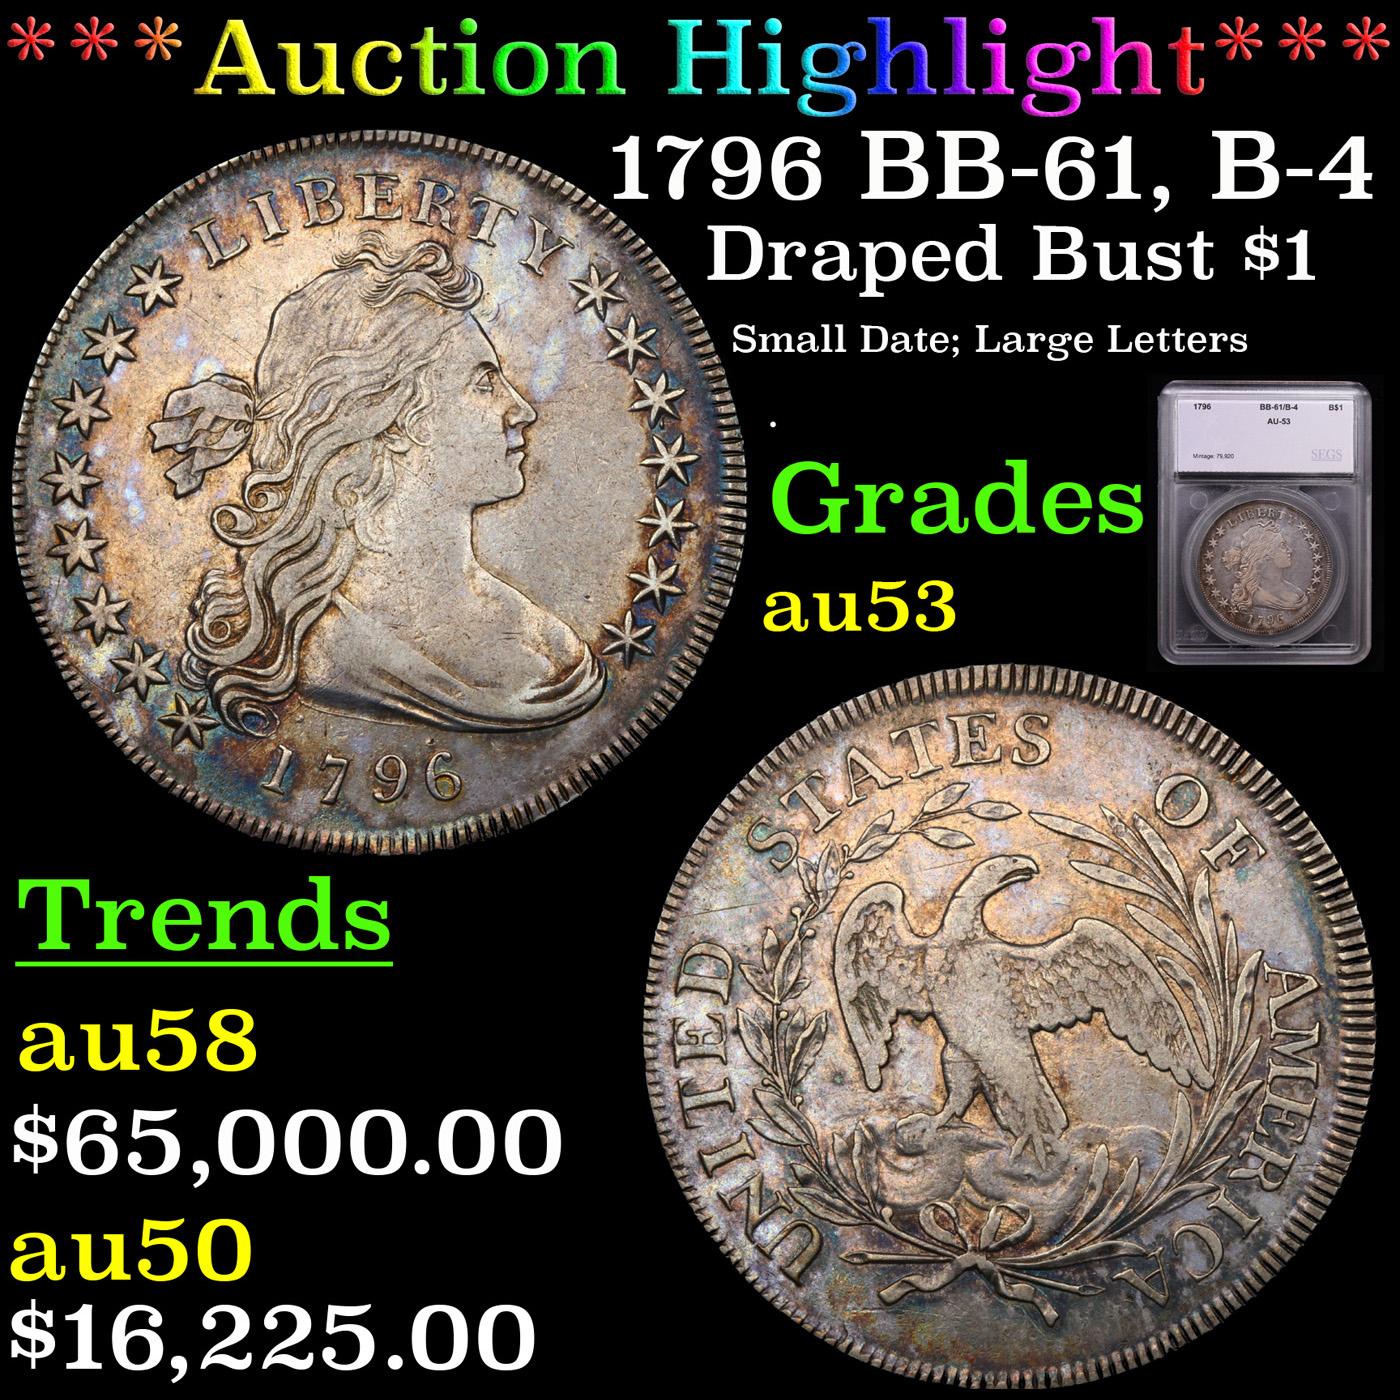 *HIGHLIGHT OF ENTIRE MONTH* 1796 BB-61, B-4 Draped Bust Dollar $1 Graded au53 By SEGS (fc)